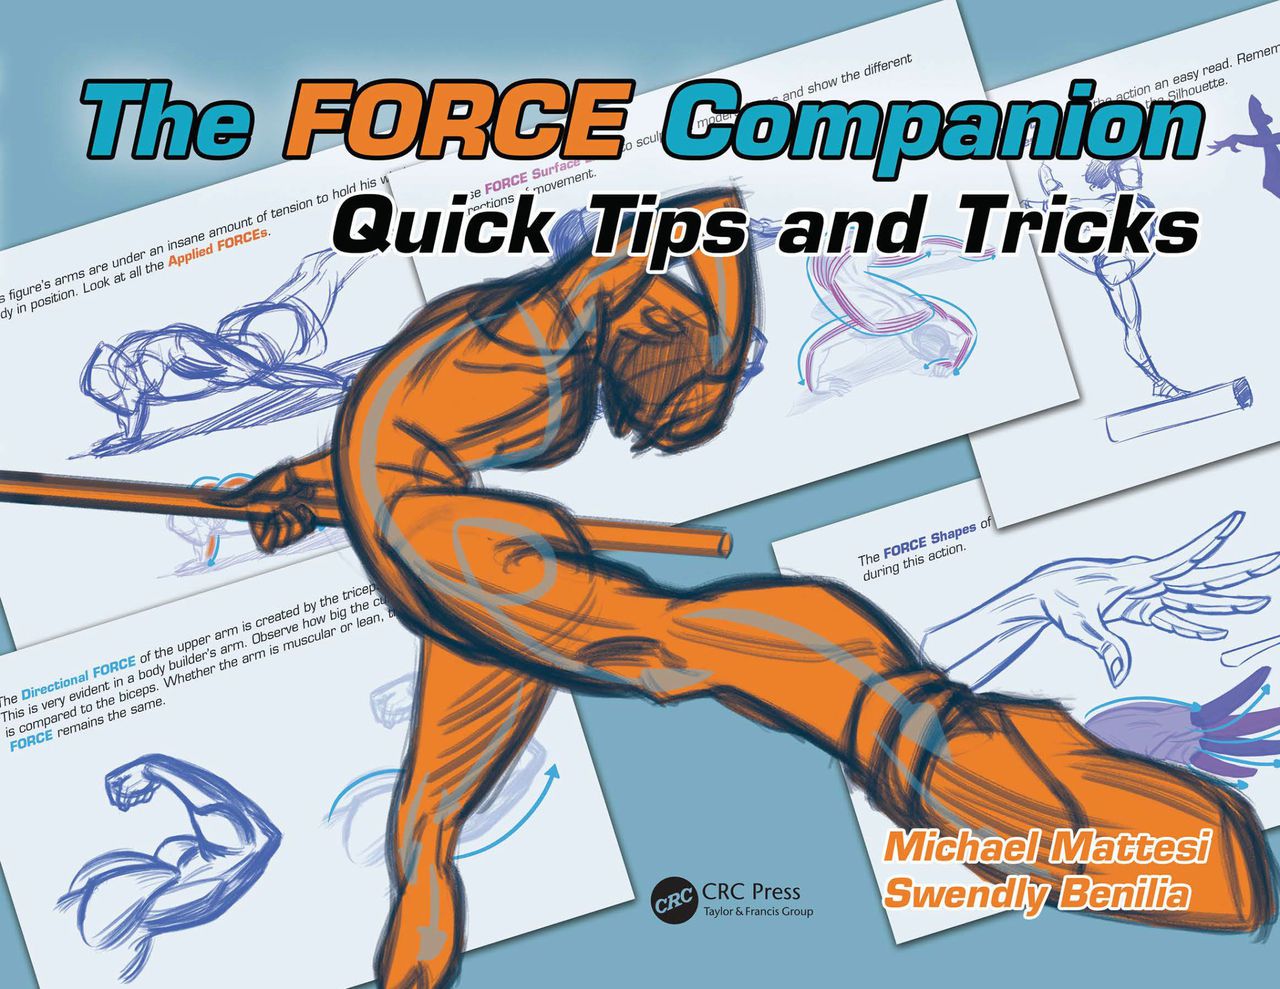 The Force companion_ quick tips and tricks-CRC Press (2019) - Michael D. Mattesi [Digital] 1